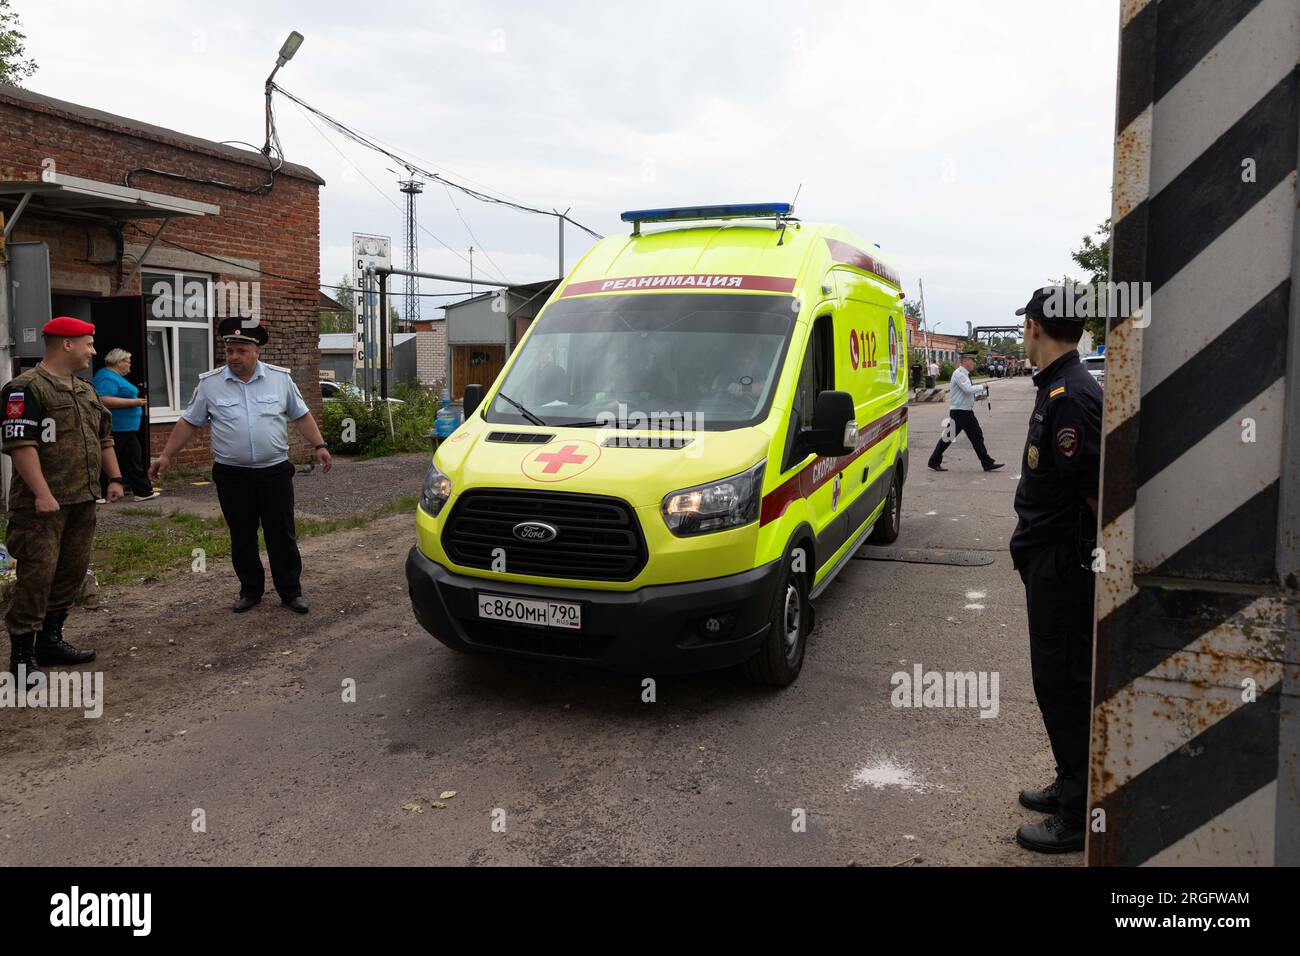 (230809) -- MOSCOW, Aug. 9, 2023 (Xinhua) -- An ambulance leaves the blast site of a plant in Moscow region, Russia, Aug. 9, 2023. Forty-three people have been injured so far in a blast at an optical-mechanical plant in the city of Sergiev Posad in the Moscow region on Wednesday, local authorities said. The explosion happened on Wednesday morning at around 10:40 a.m. local time (0740 GMT) at a pyrotechnics warehouse, which was being rented out on the optical-mechanical plant's territory by a private company, said Governor of the Moscow Region Andrei Vorobiev in a Telegram post. (Xinhua/Bai X Stock Photo